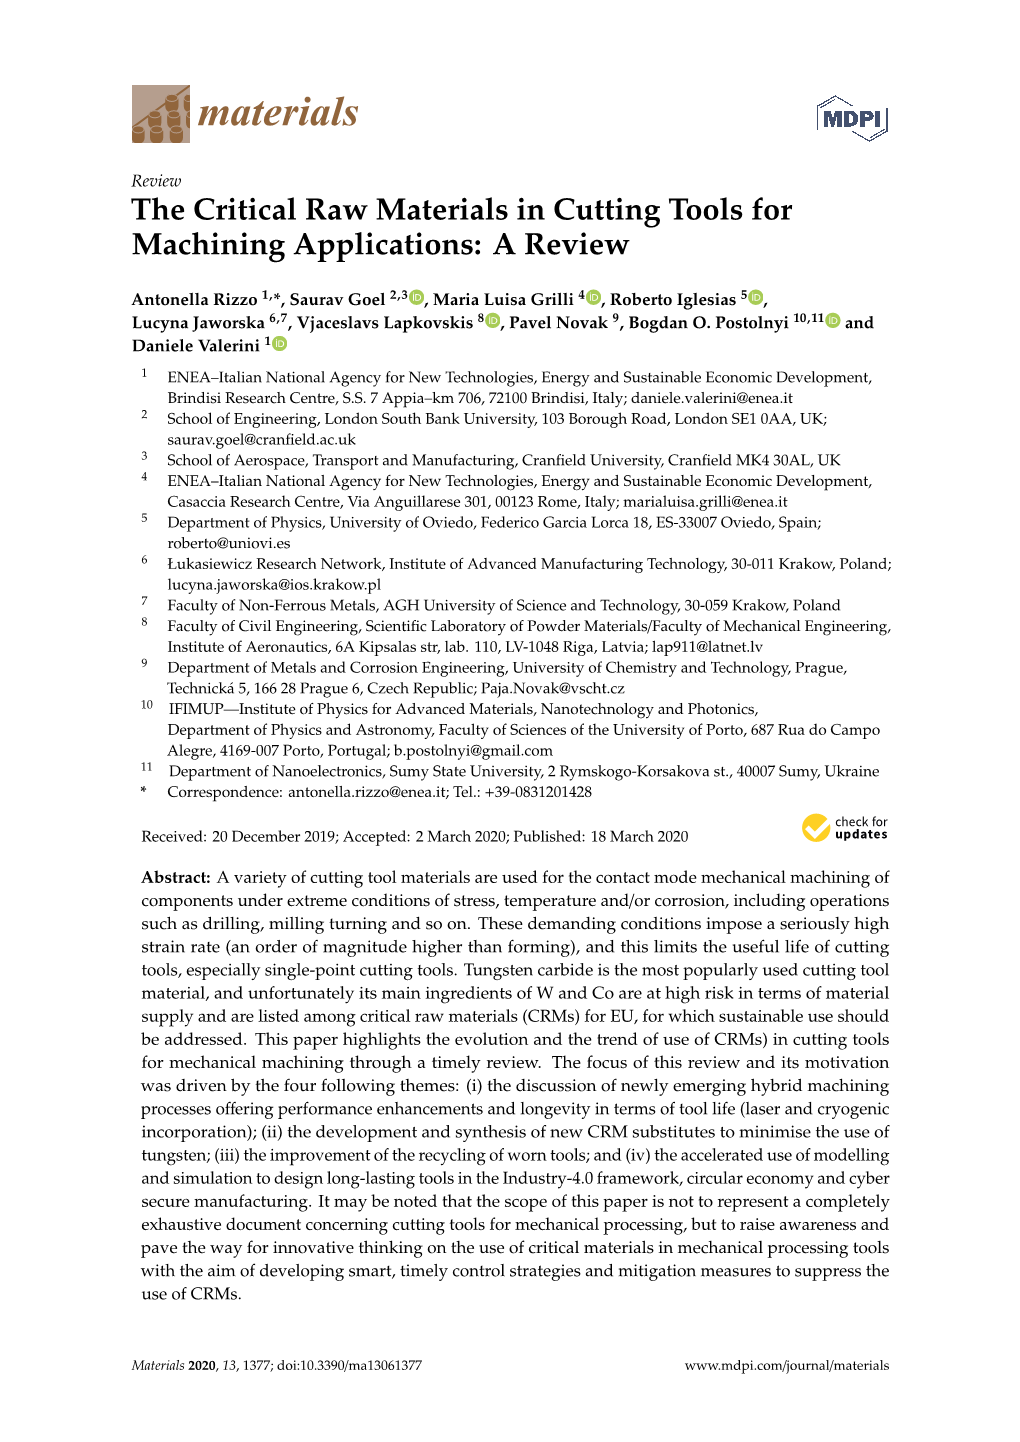 The Critical Raw Materials in Cutting Tools for Machining Applications: a Review